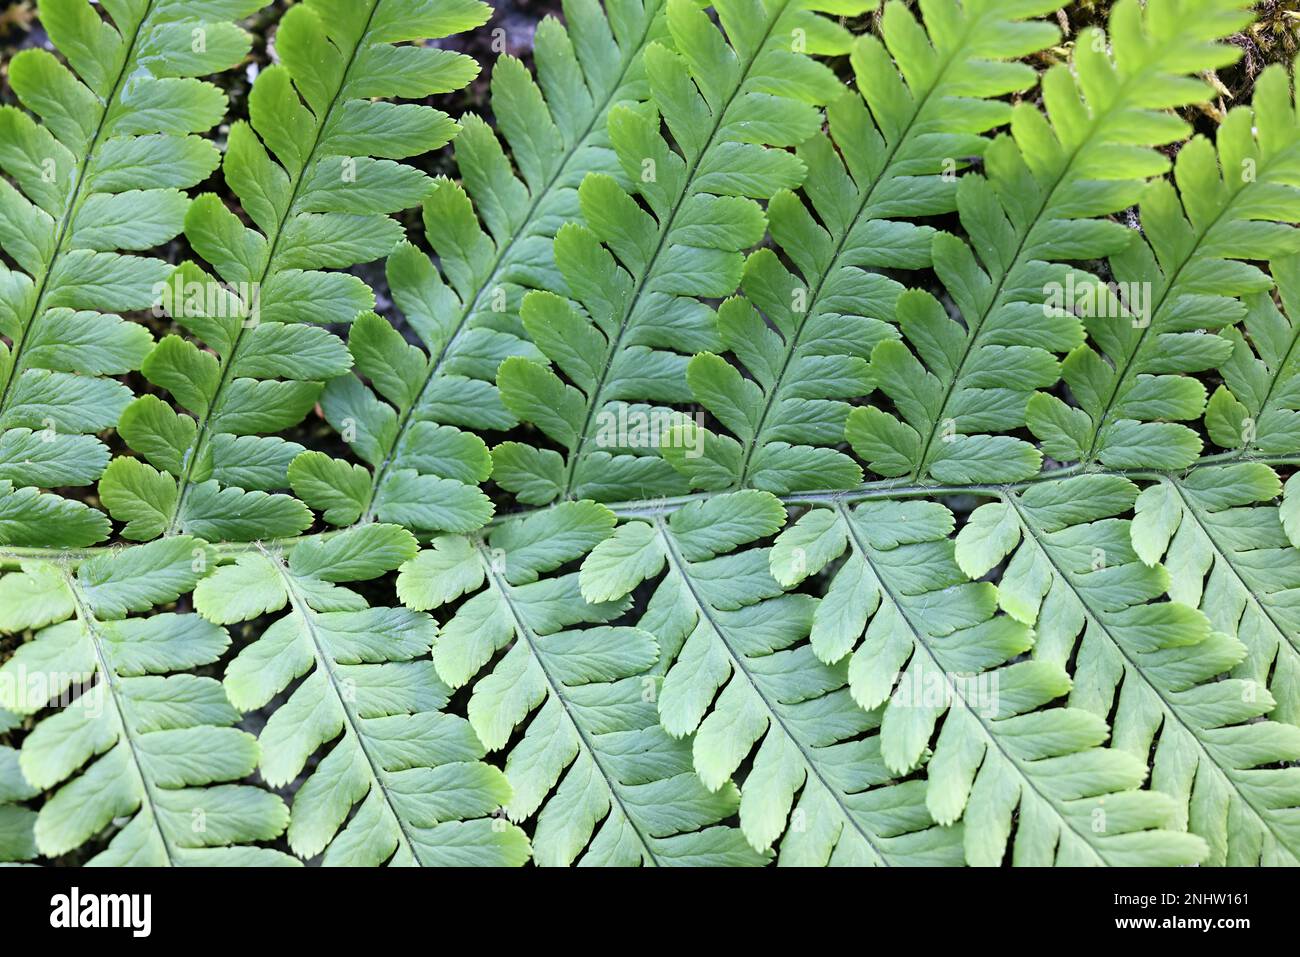 Dryopteris filix-mas, commonly known as male fern or worm fern, wild plant from Finland Stock Photo